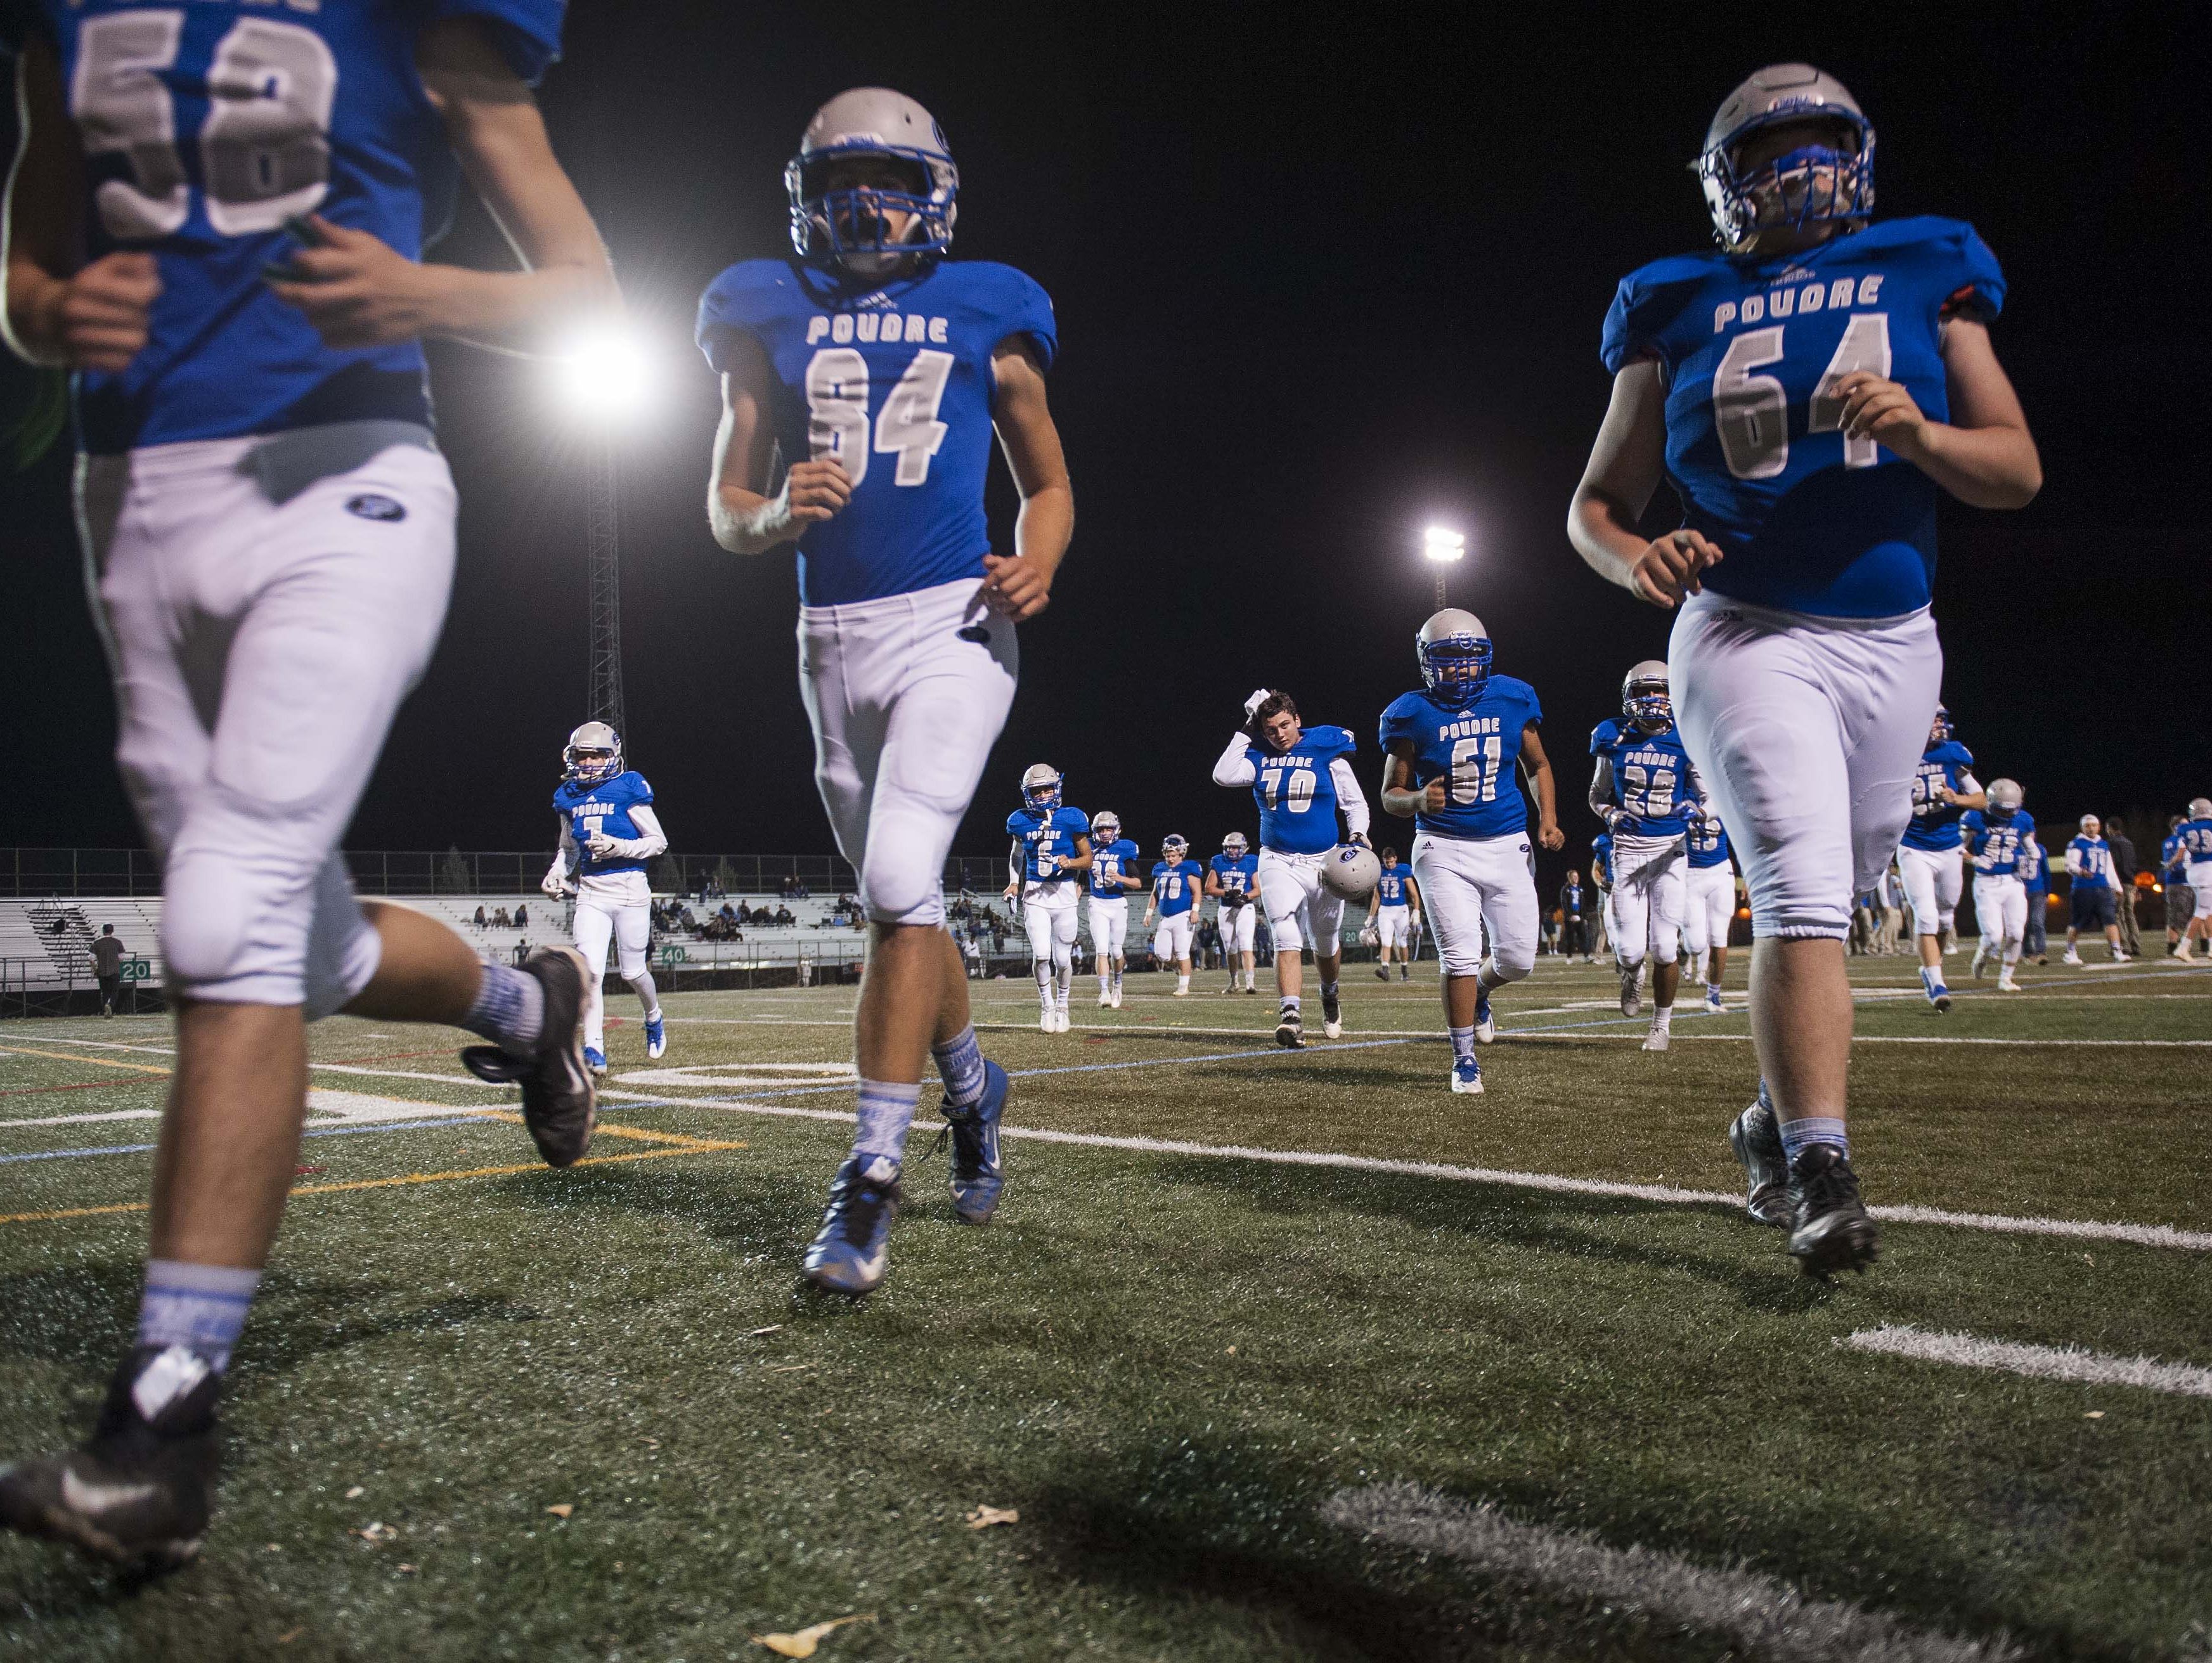 Thursday's 6 p.m. game between Poudre and Highlands Ranch will be streamed live at Coloradoan.com.